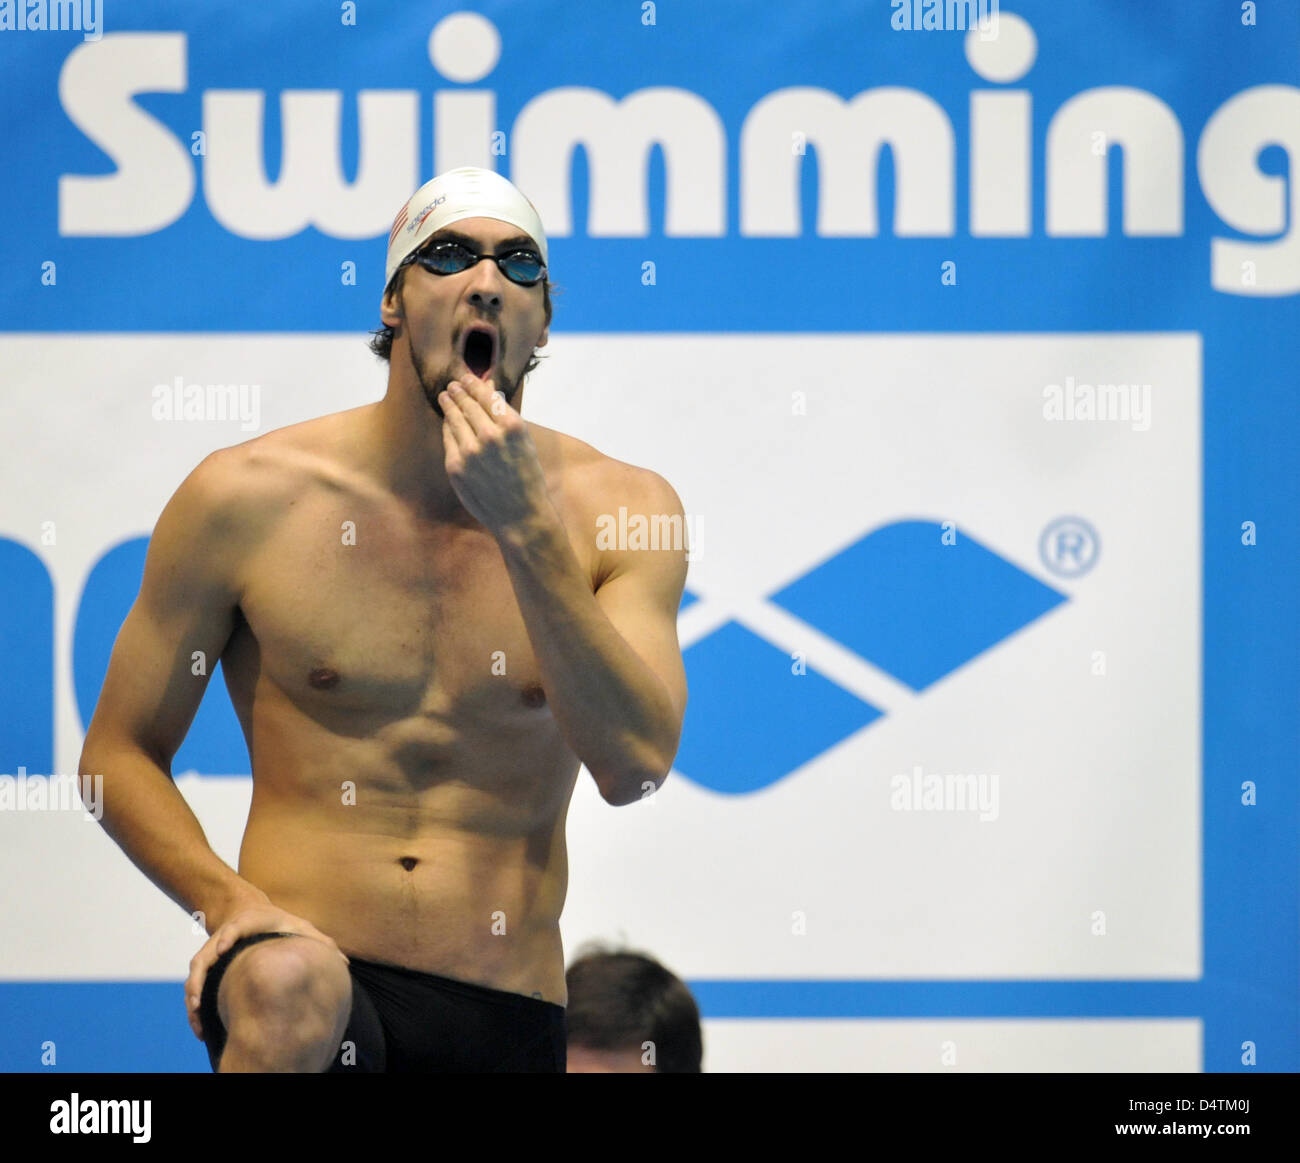 US swimmer Michael Phelps during the short track world cup event in Berlin, Germany, 14 November 2009. Phelps competes in short swim suits, complyng with a rule which will be introduced the following year. Photo : Bernd Thissen Stock Photo